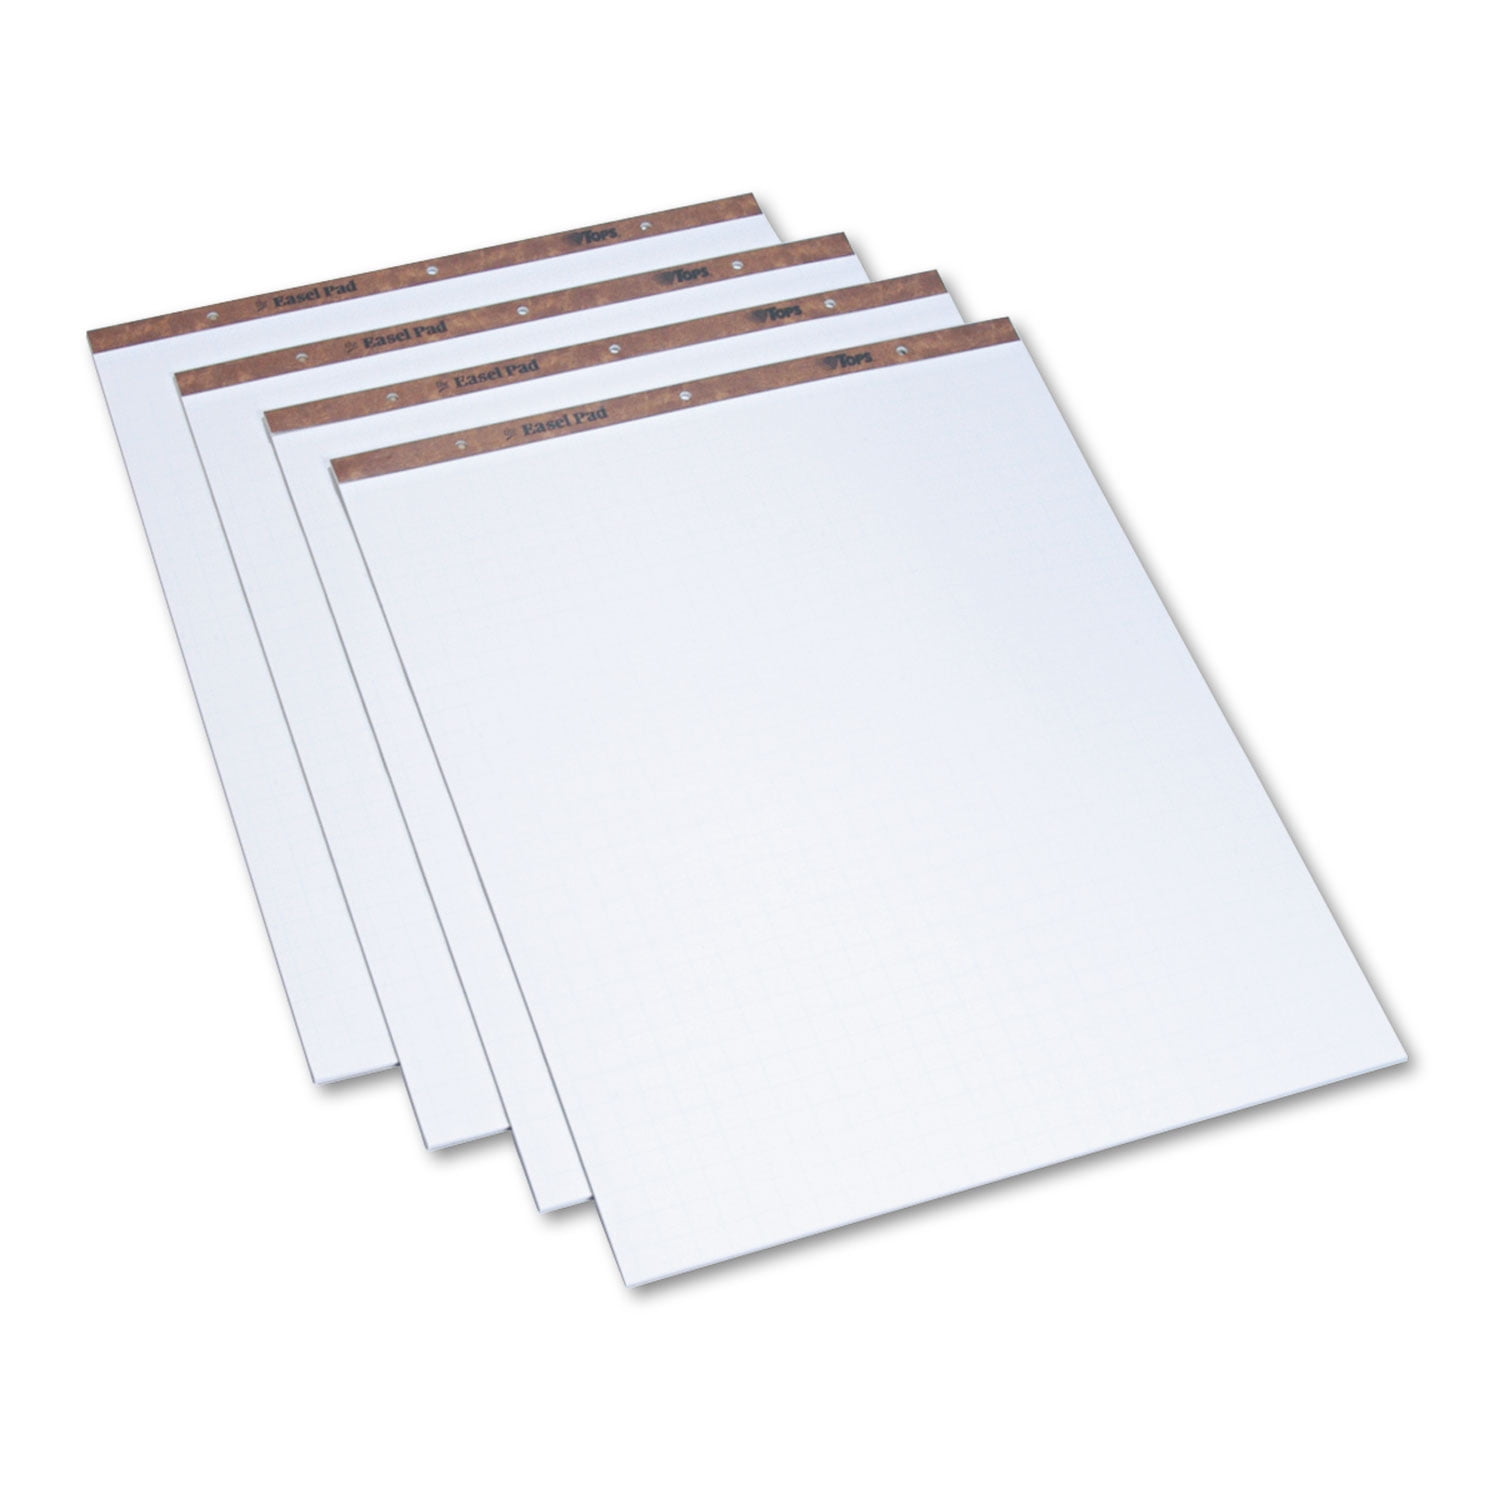 TOPS Plain Paper Easel Pads - The Office Point